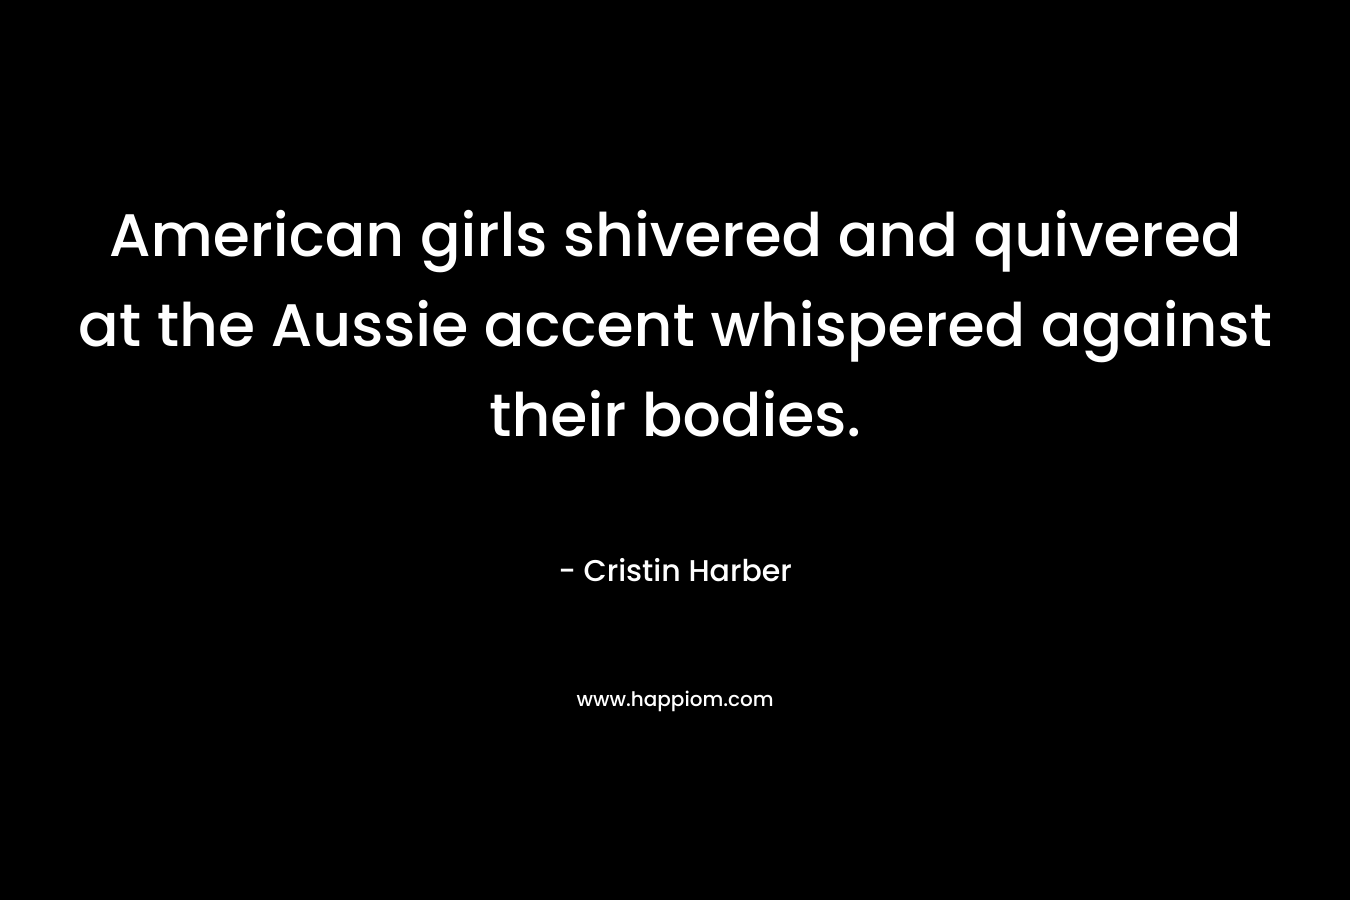 American girls shivered and quivered at the Aussie accent whispered against their bodies. – Cristin Harber